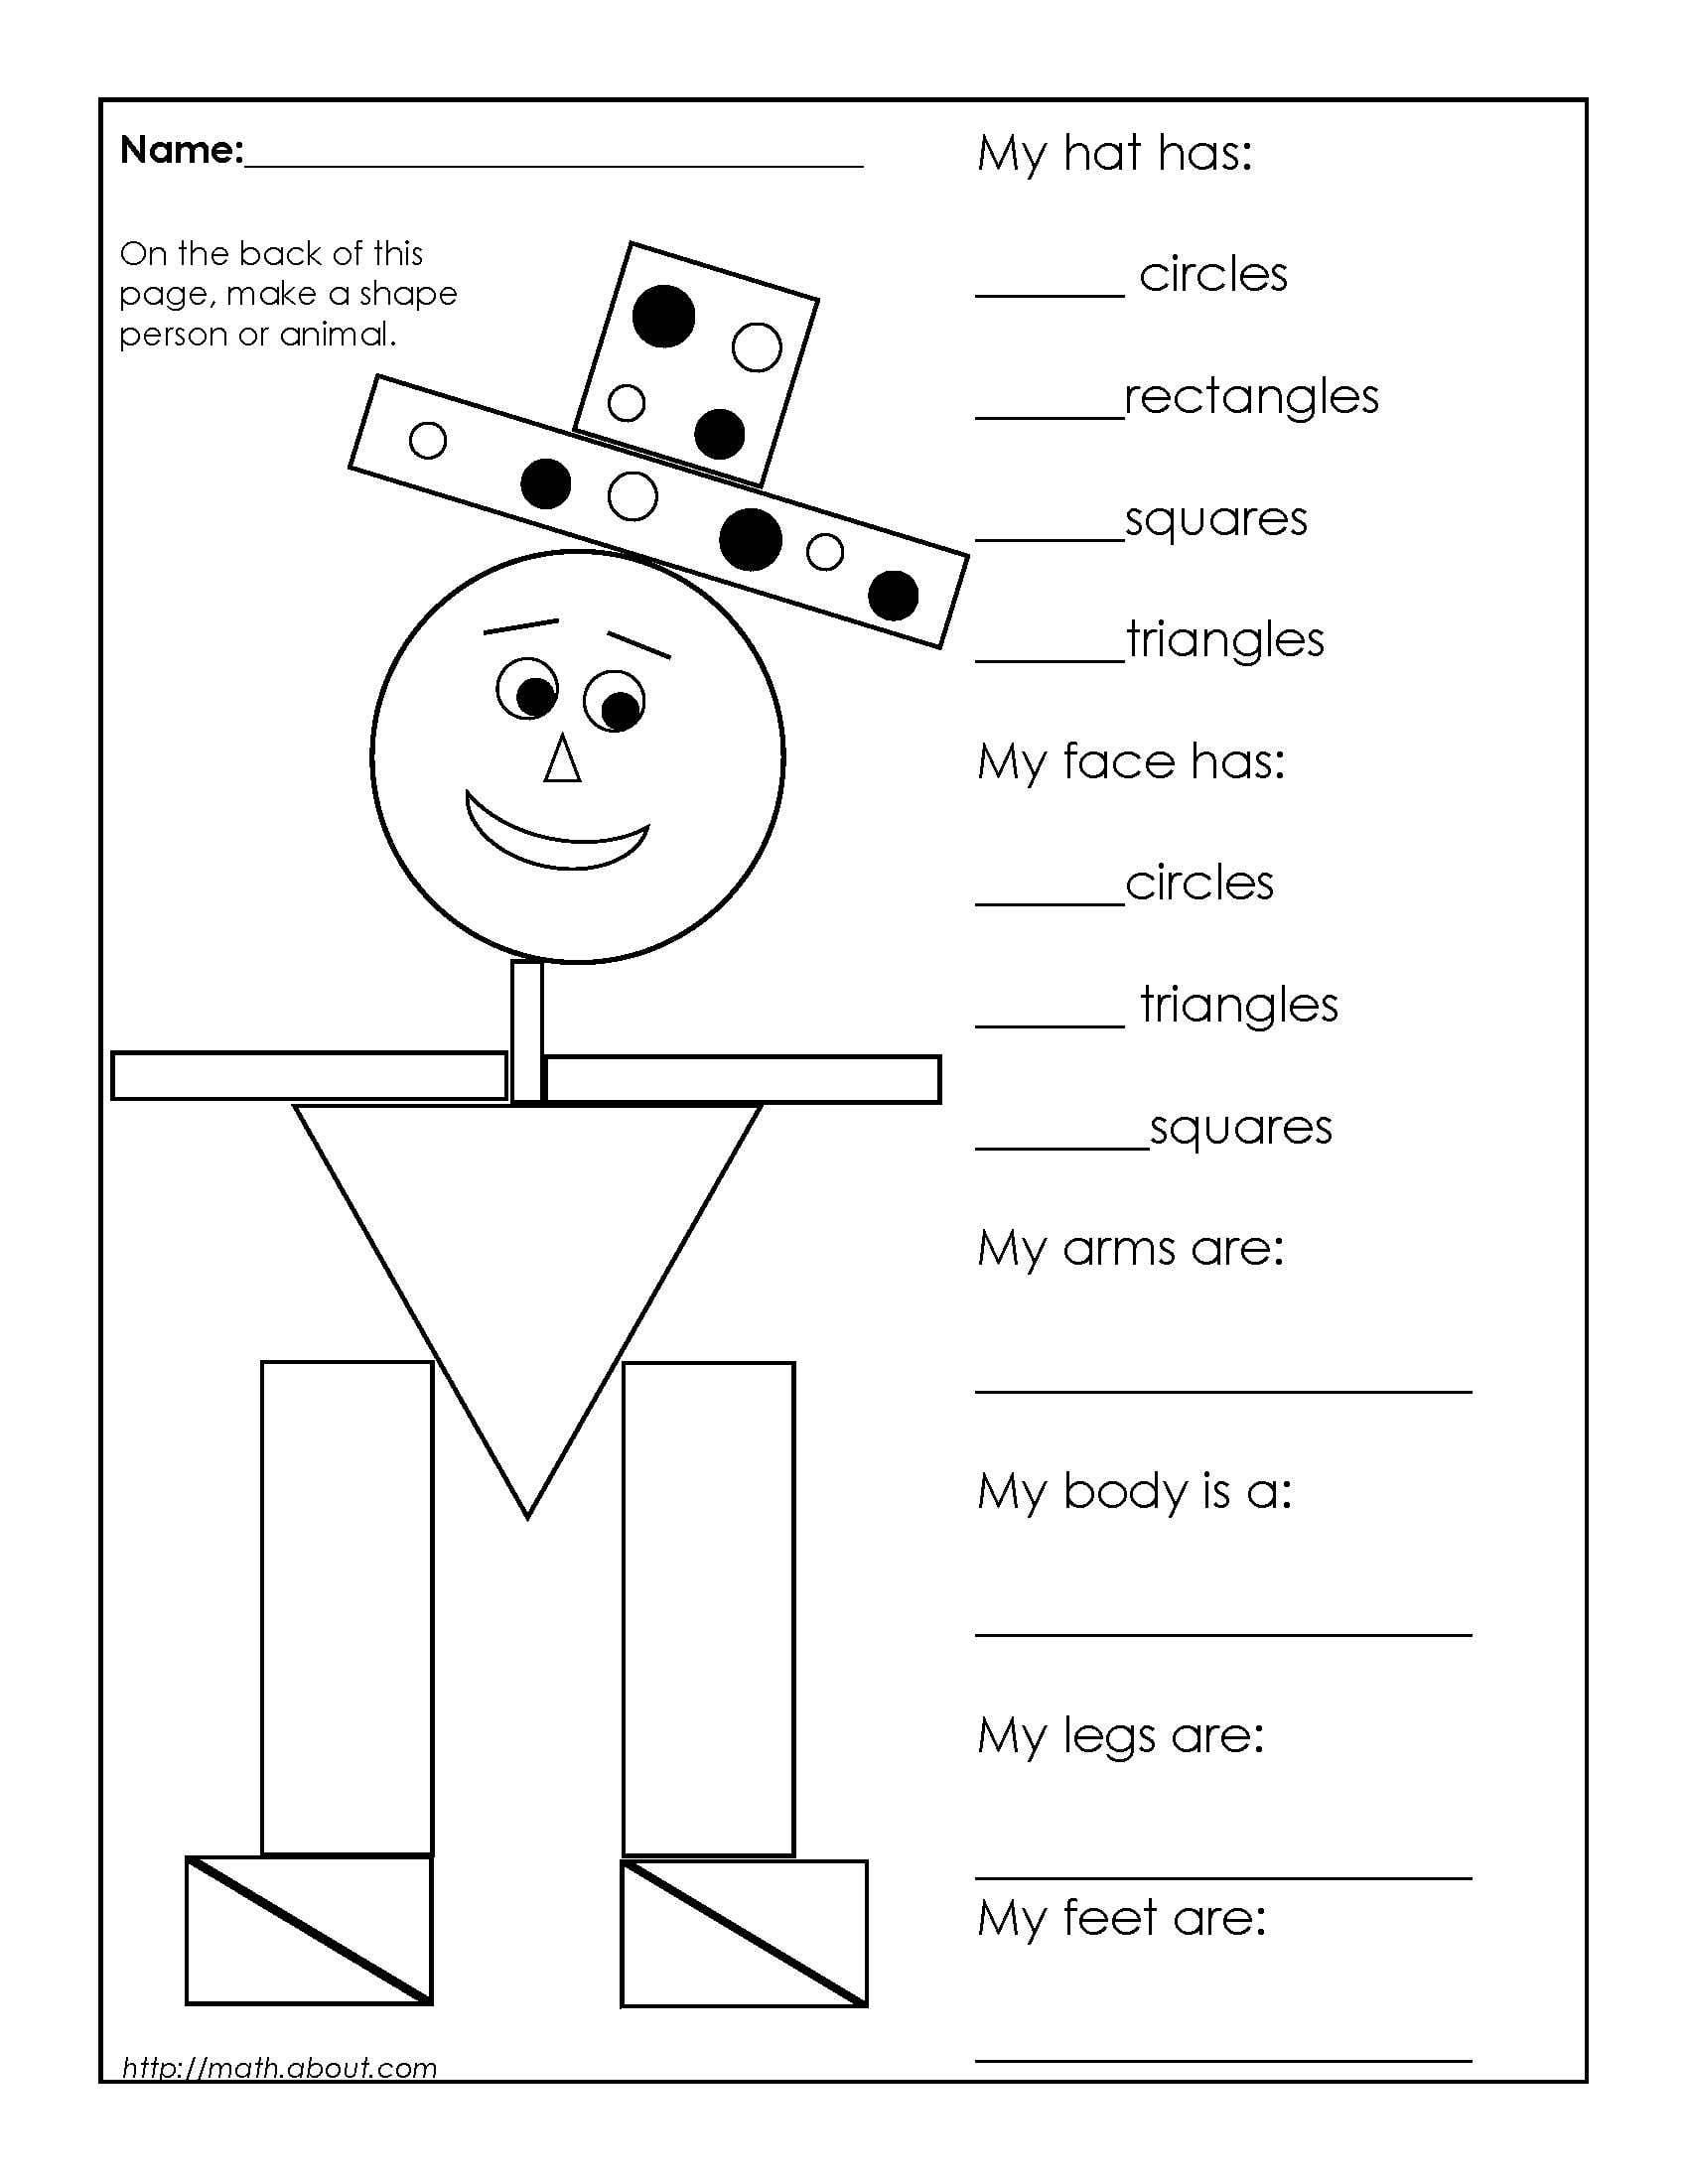 1St Grade Geometry Worksheets For Students | Math Activities | 1St - Free Printable Geometry Worksheets For Middle School